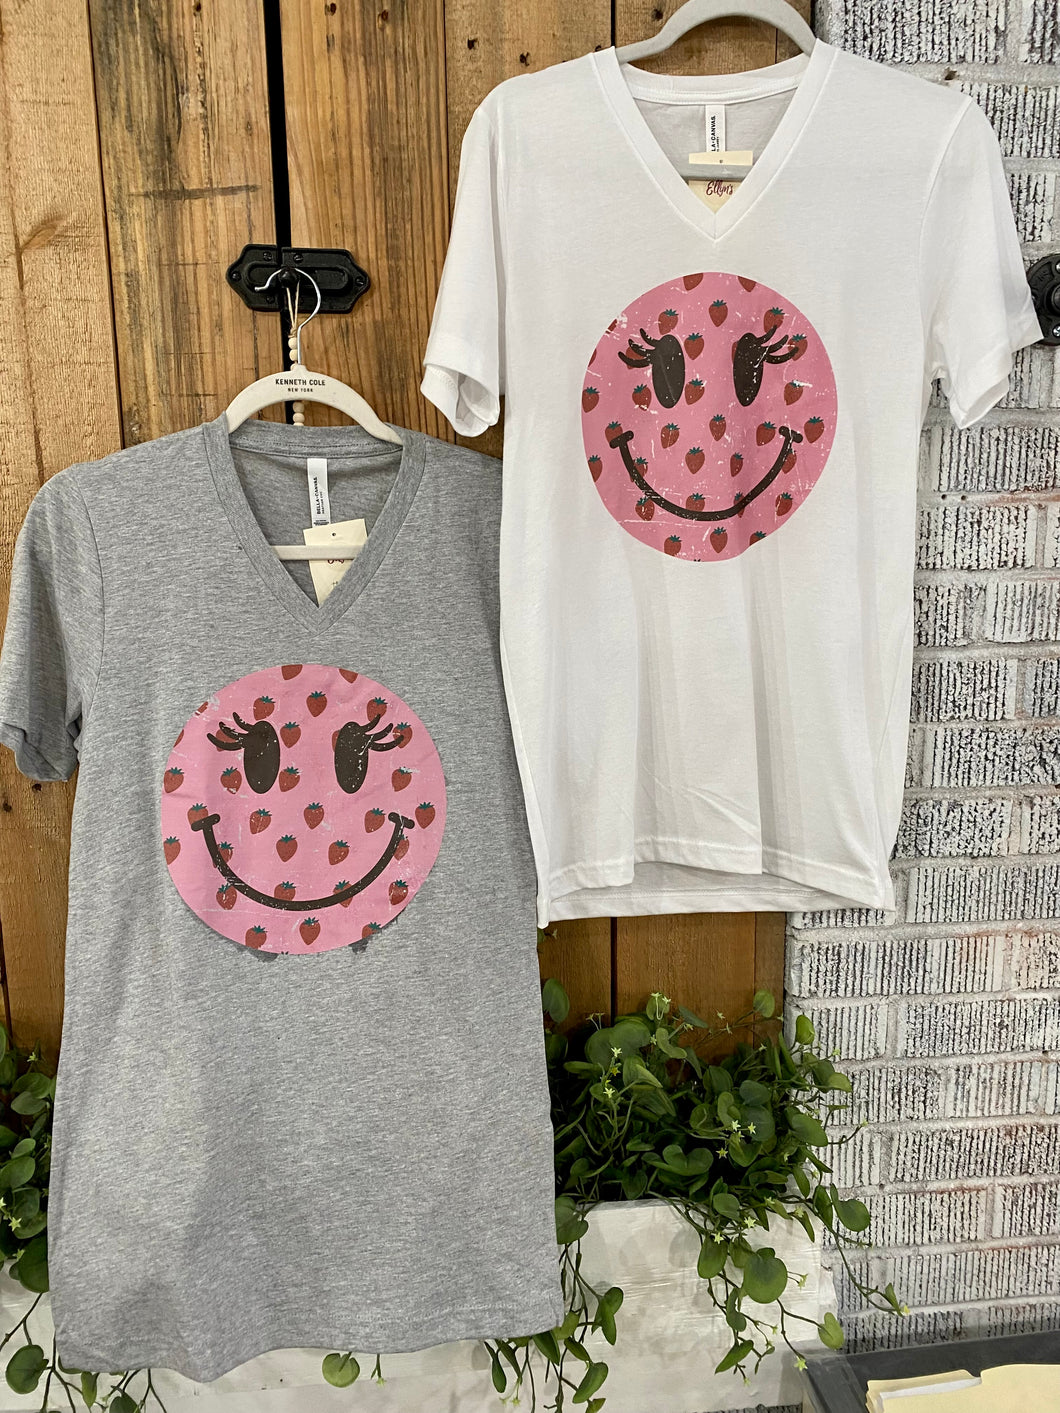 Smiley Face Strawberry Tee